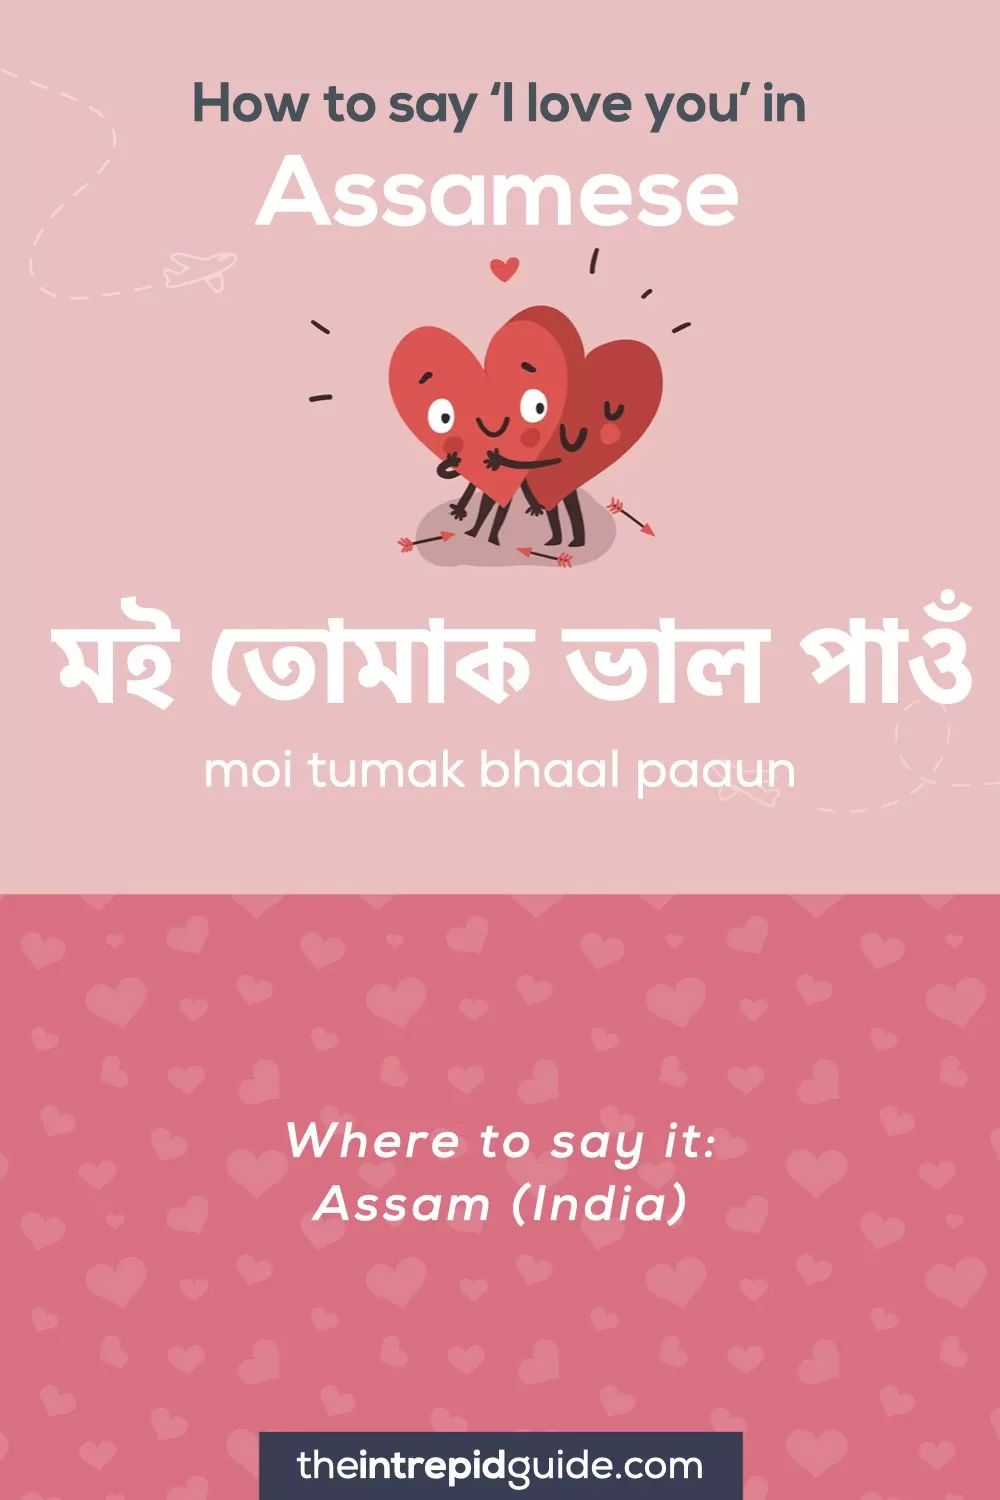 How to say I love you in different languages - Assamese - মই তোমাক ভাল পাওঁ